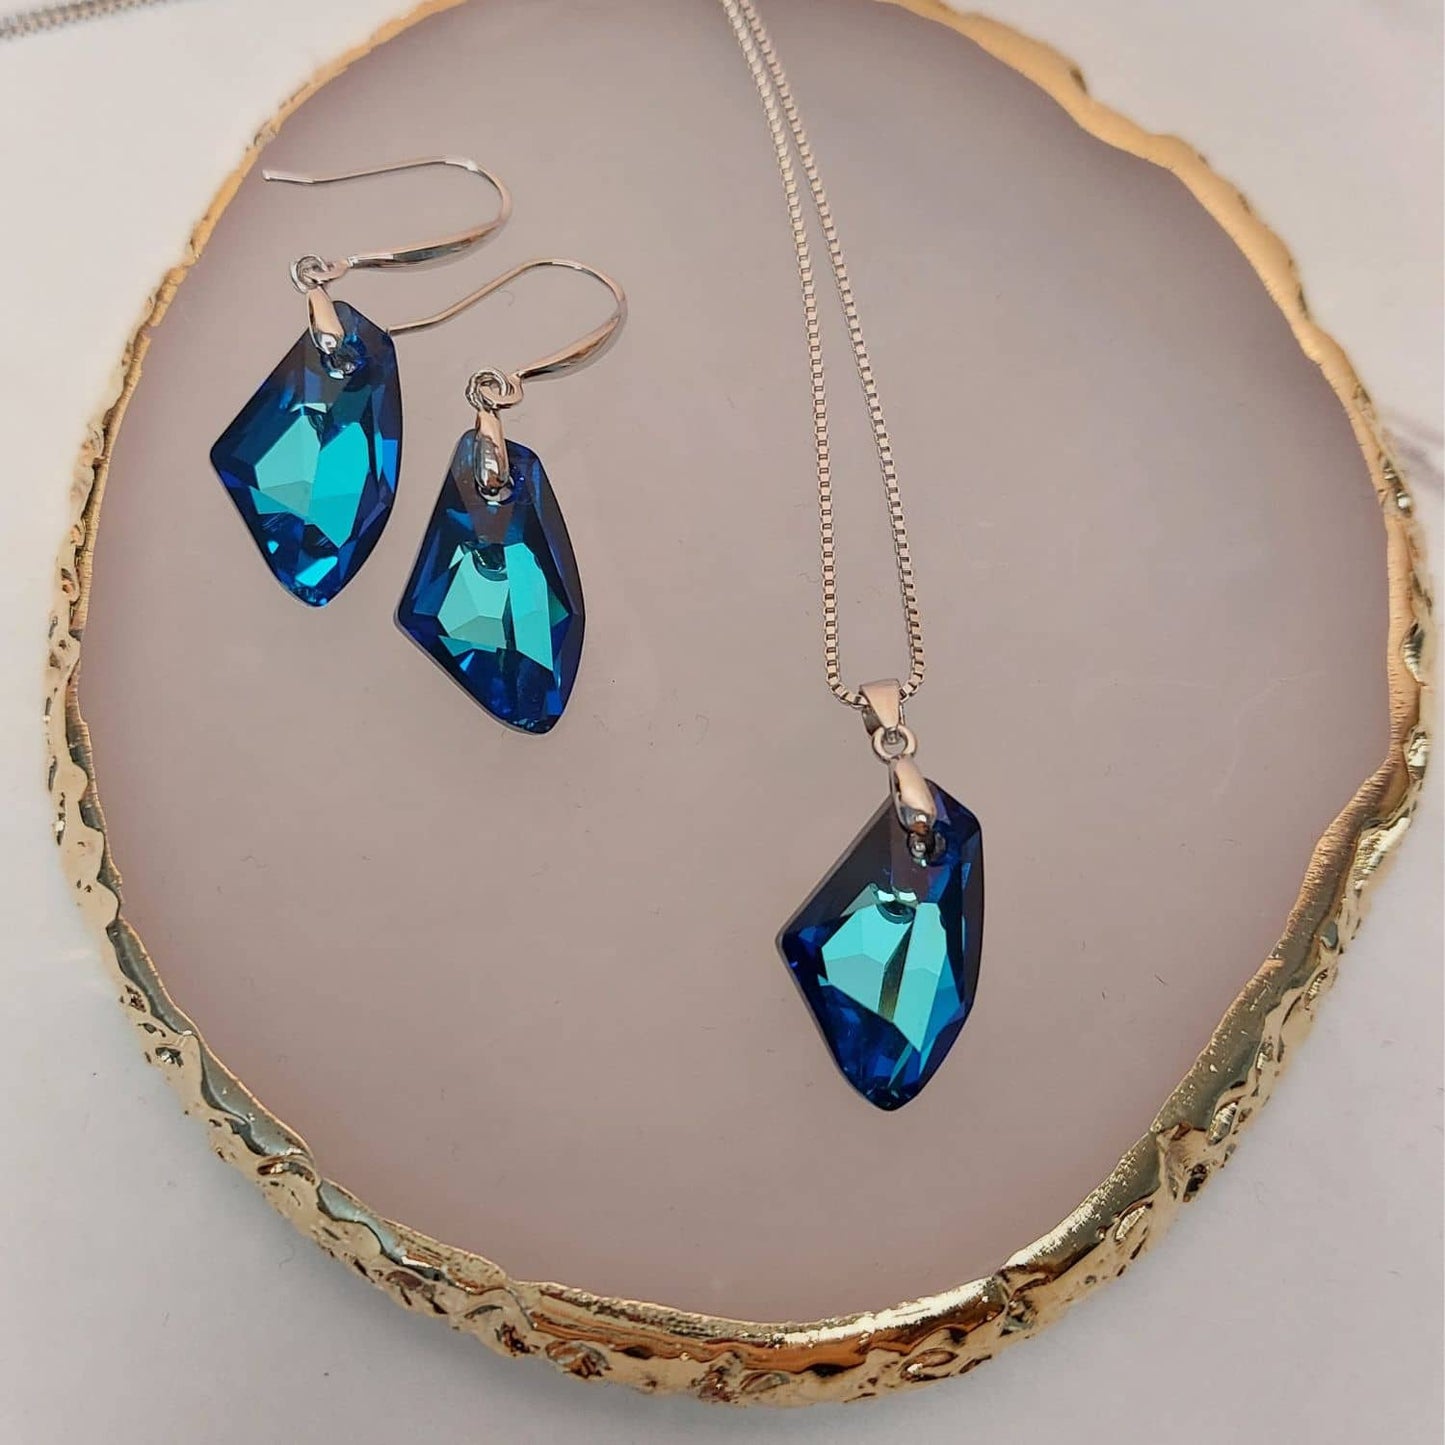 Classy Bermuda Blue Haven Earrings with Austrian Crystals